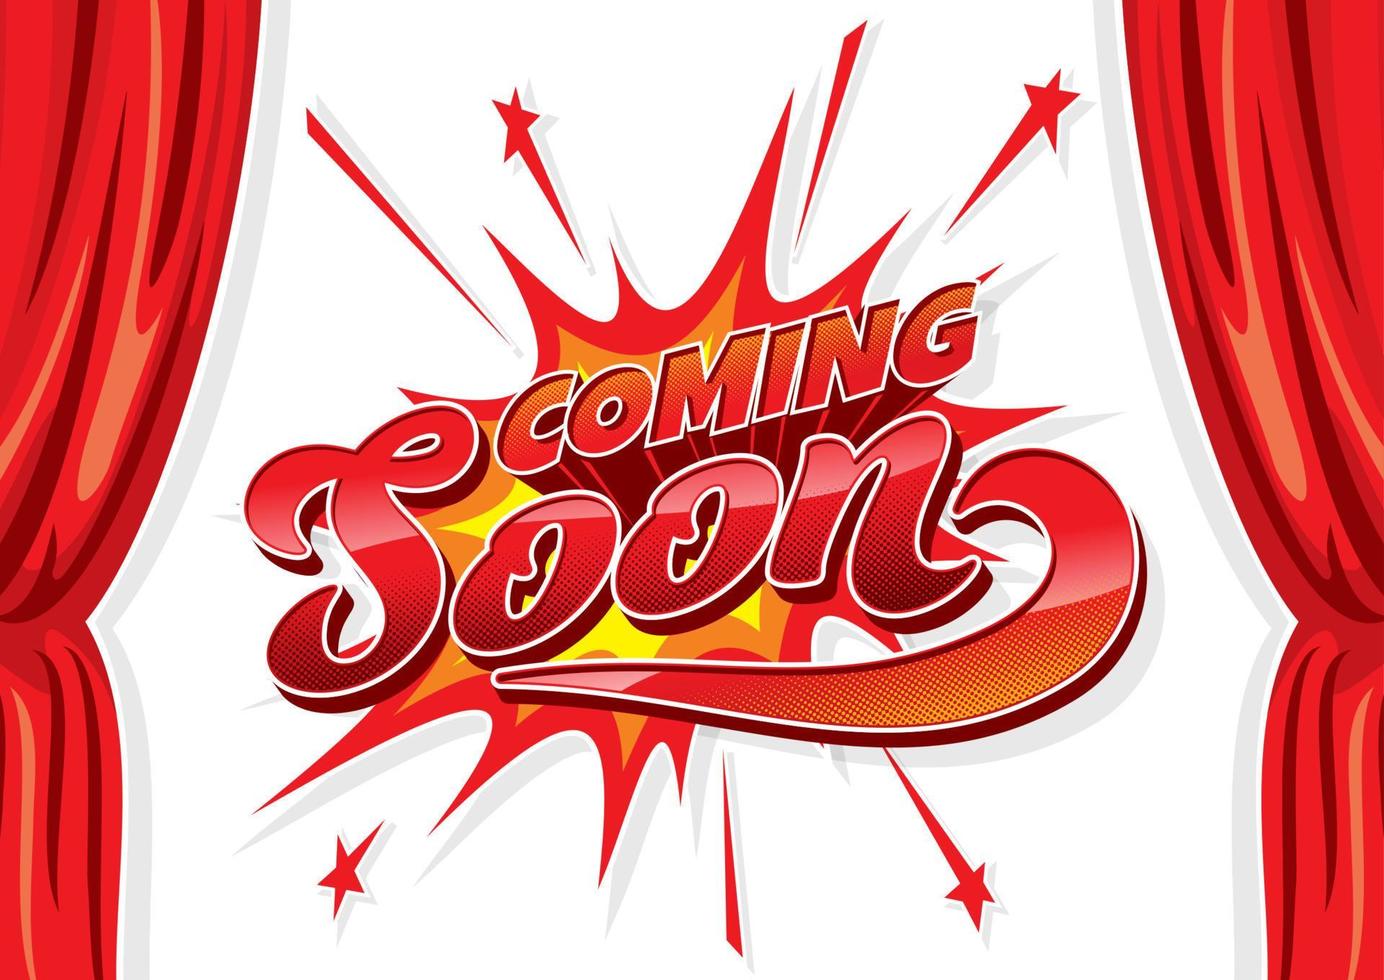 Coming soon cartoon poster with red curtains vector